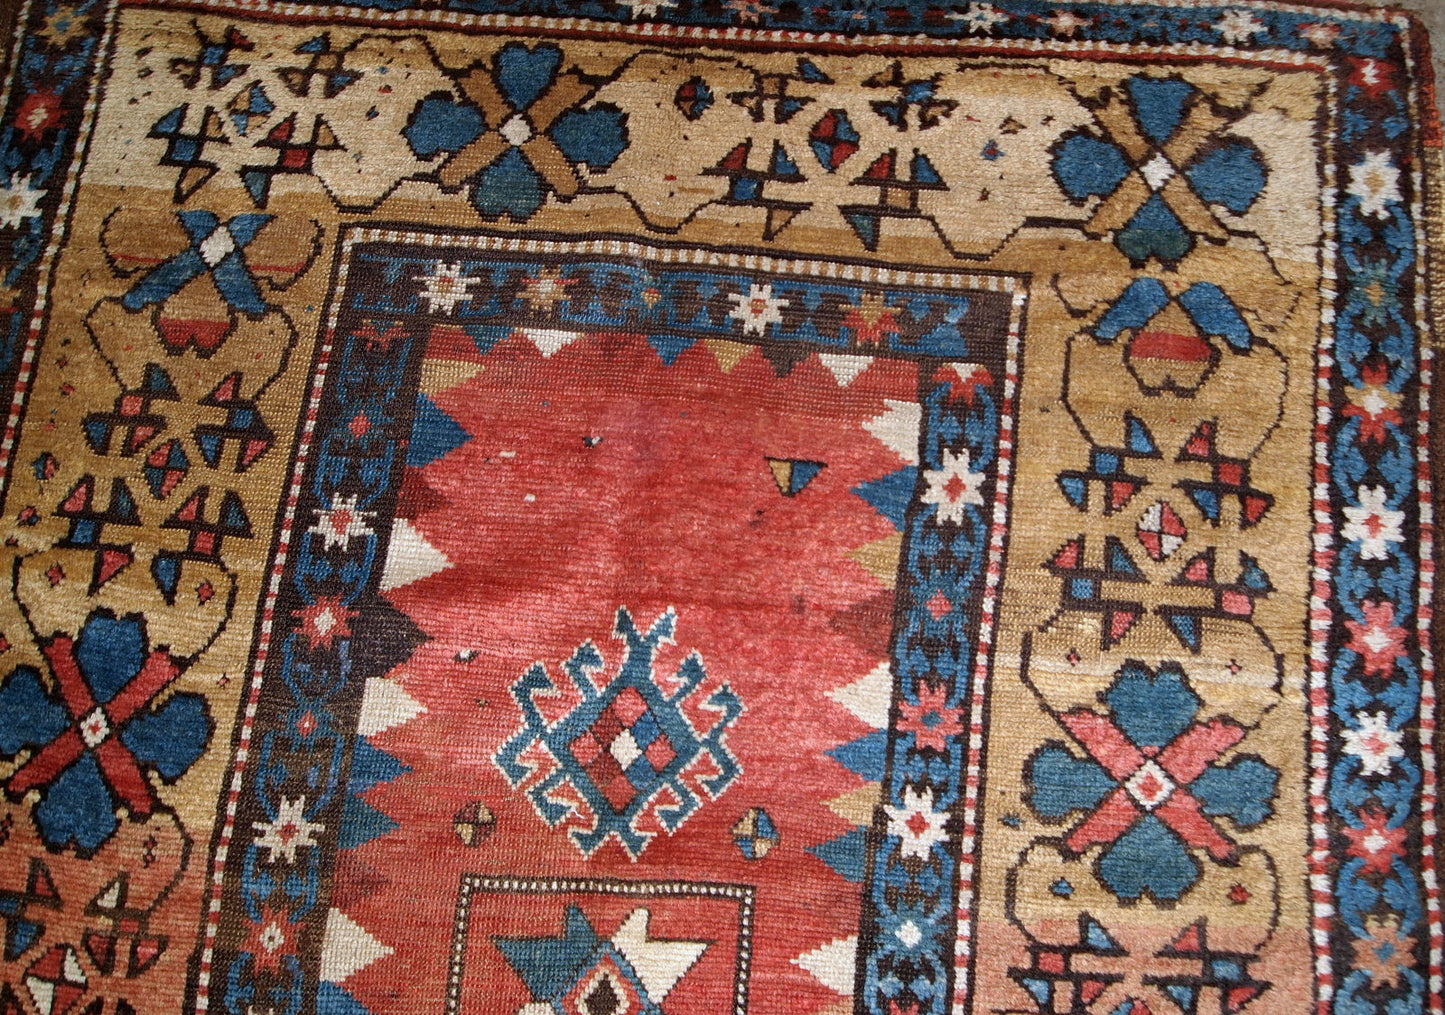 Handmade antique Caucasian Kazak rug in red and yellow shades. The rug is from the end of 19th century from Russia in original good condition.